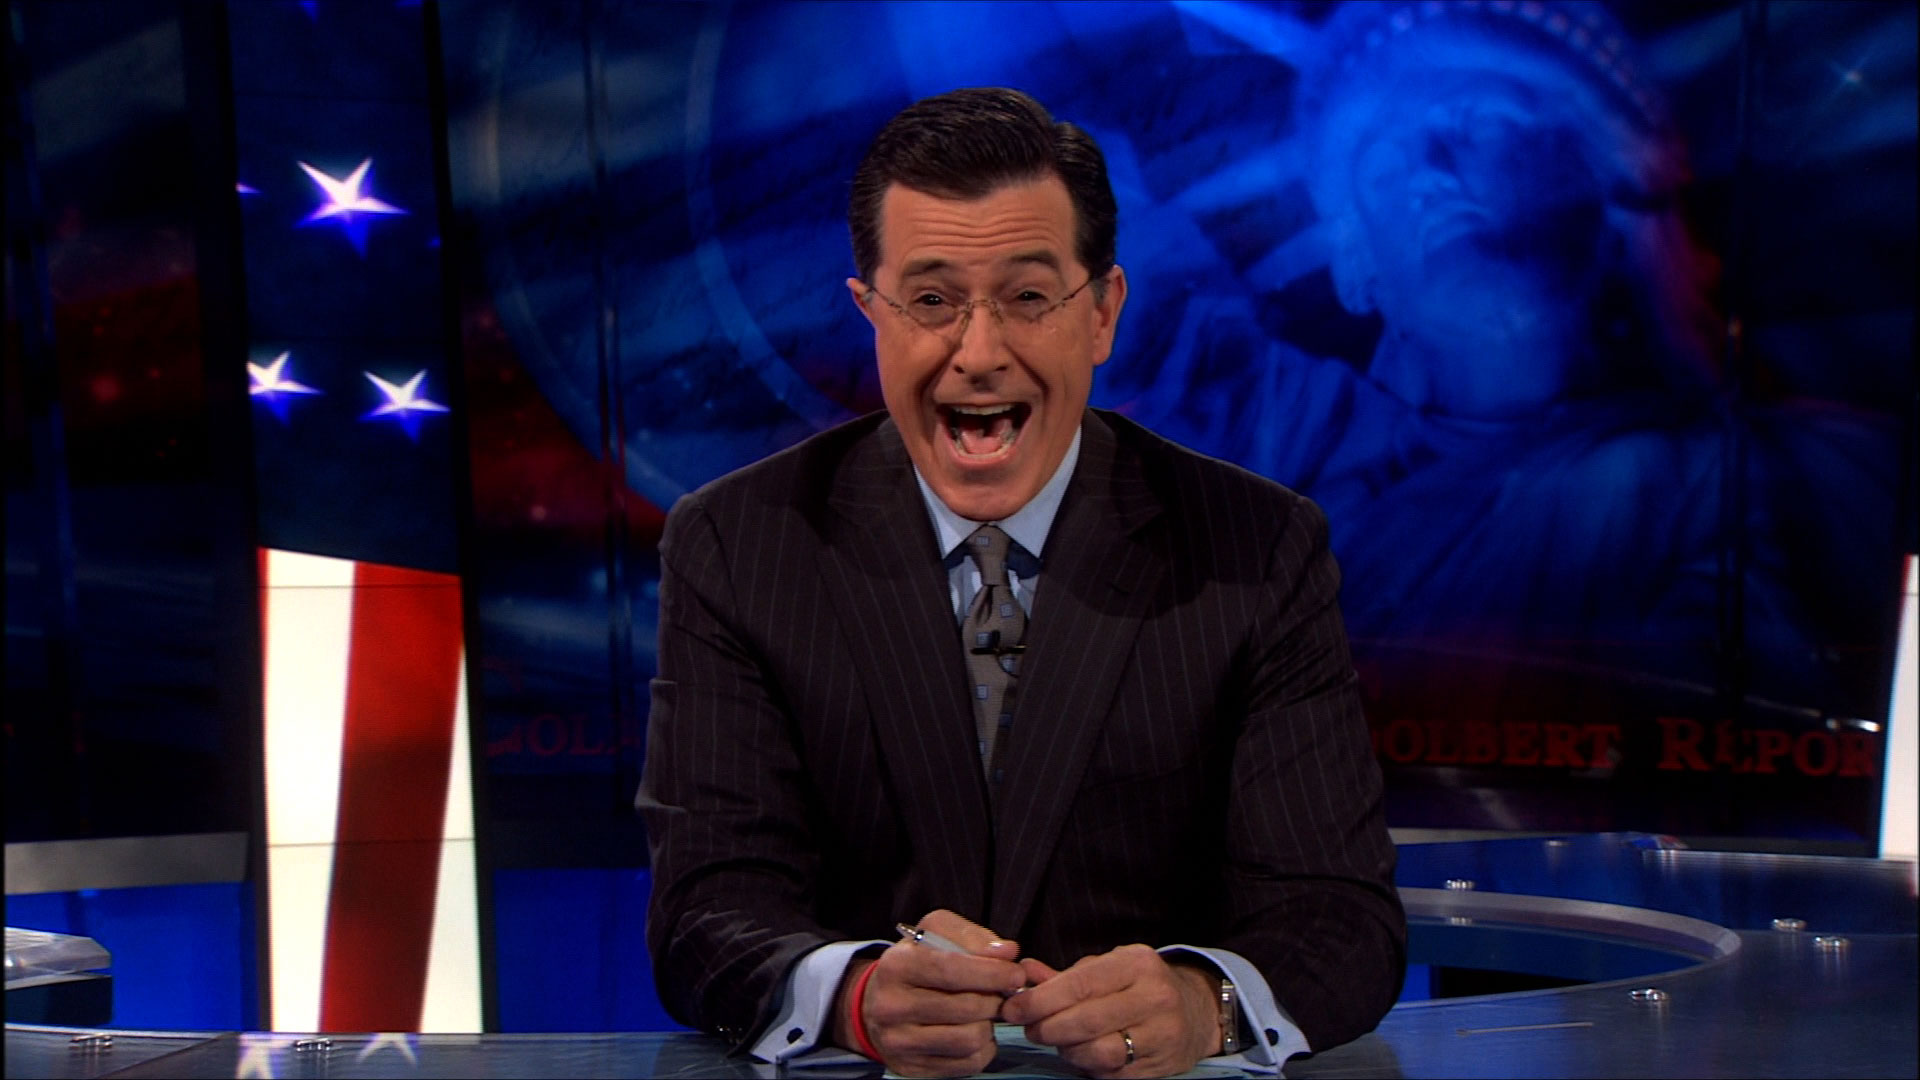 The Colbert HD Wallpaper Background Image